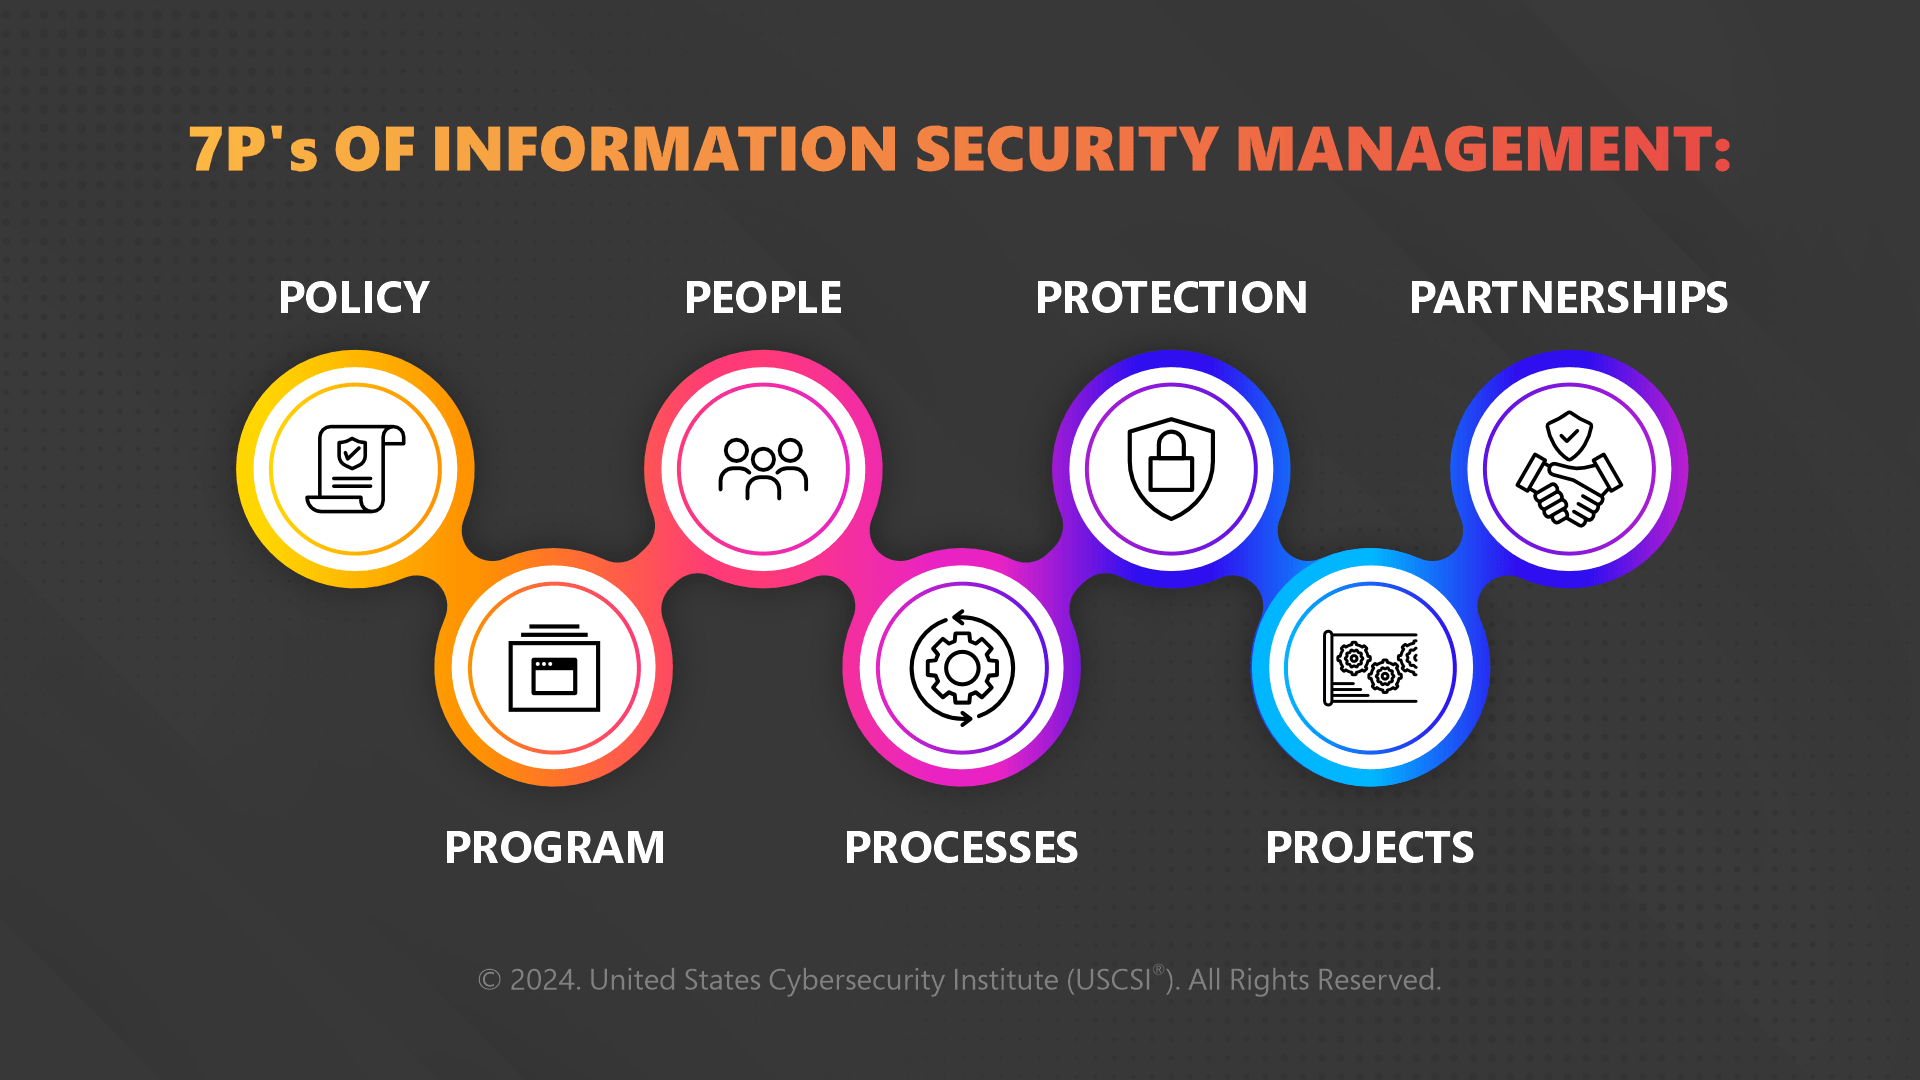 7P’s of Information Security Management